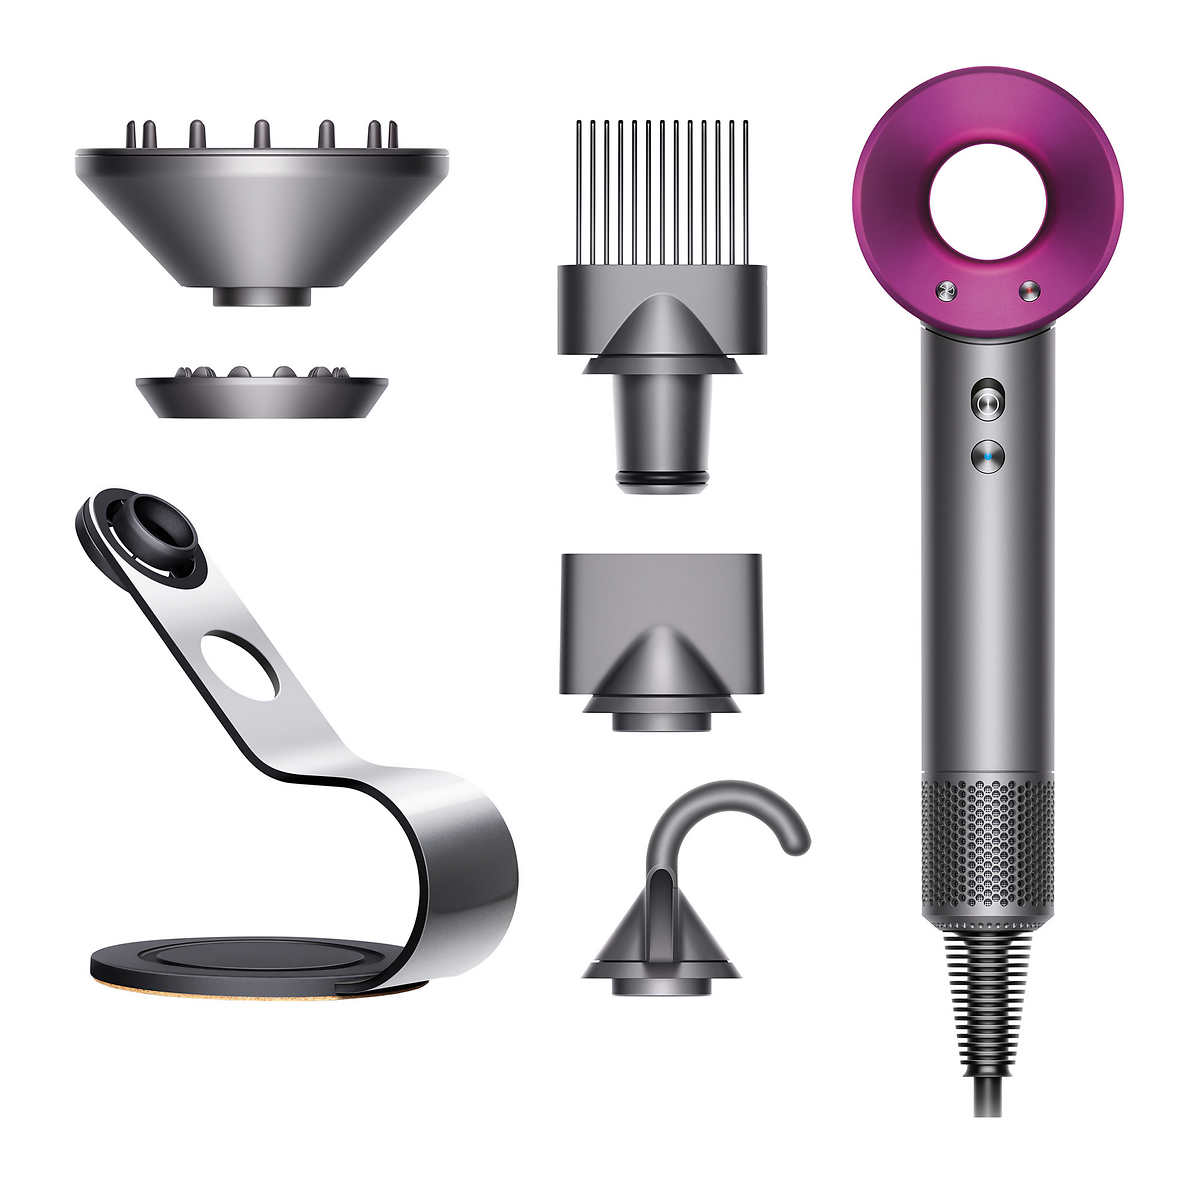 Dyson Supersonic Hair Dryer, Stand Attachments Costco